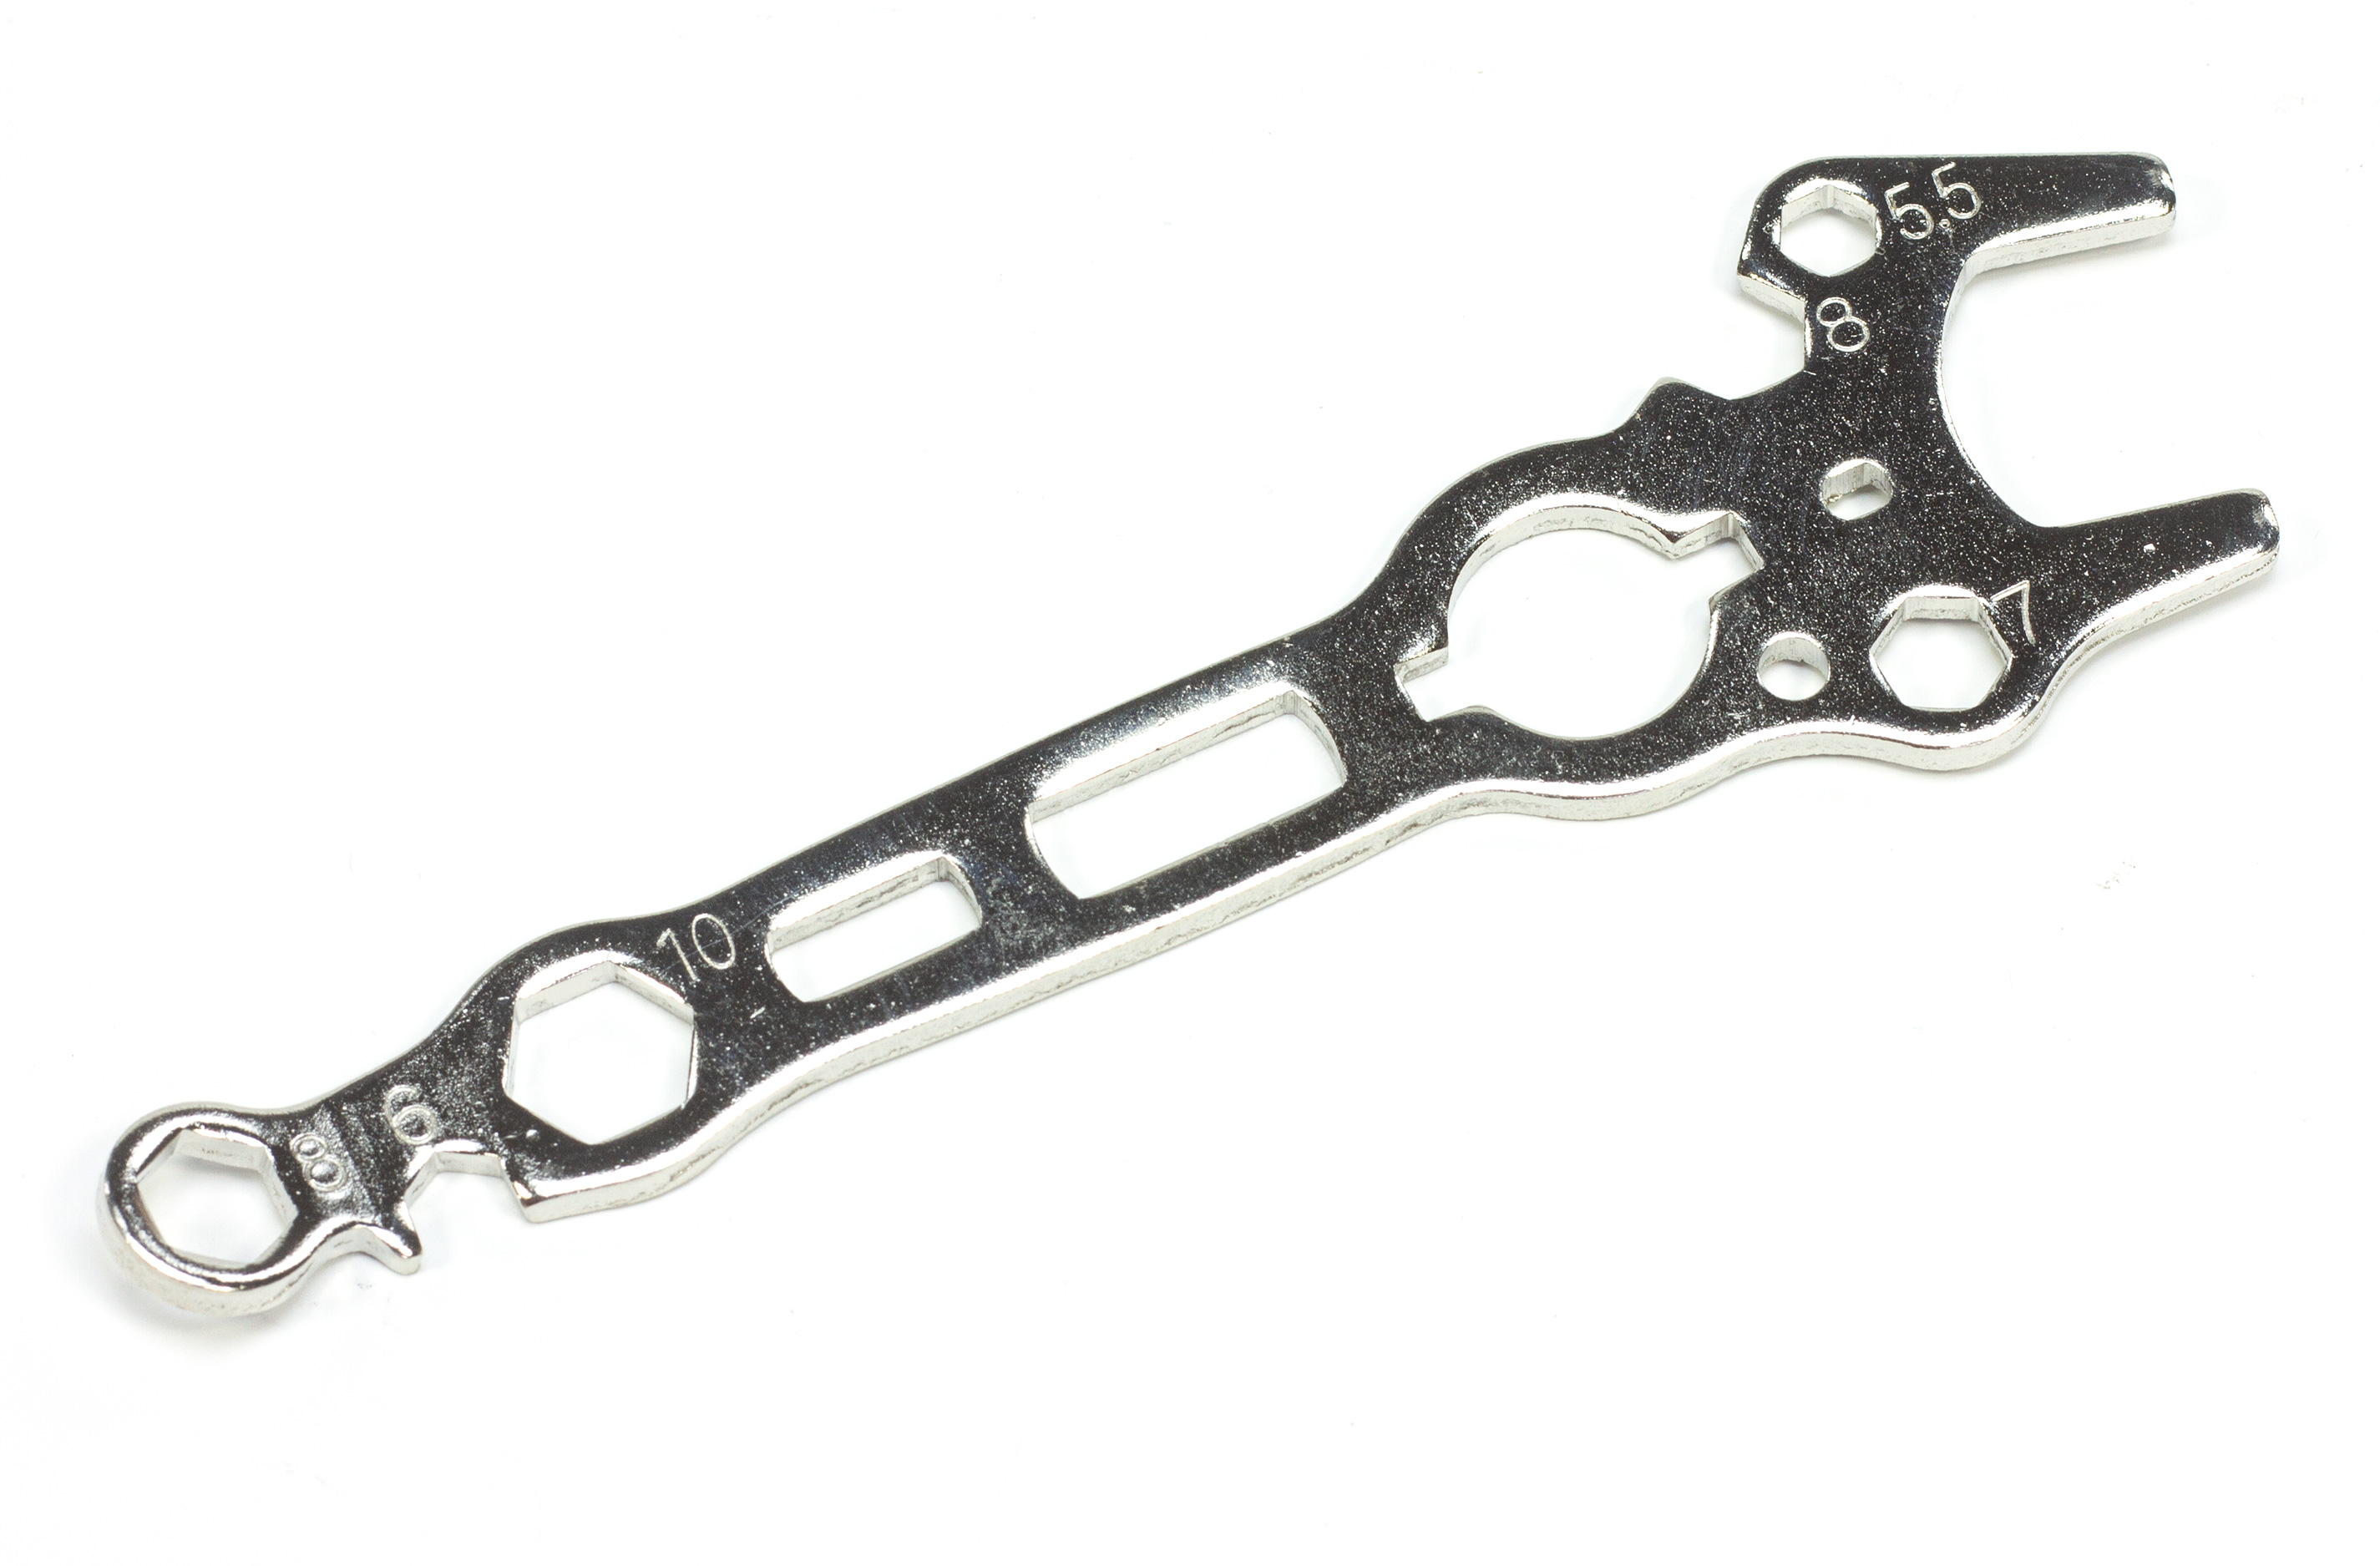 G002 Carson Multi-function wrench